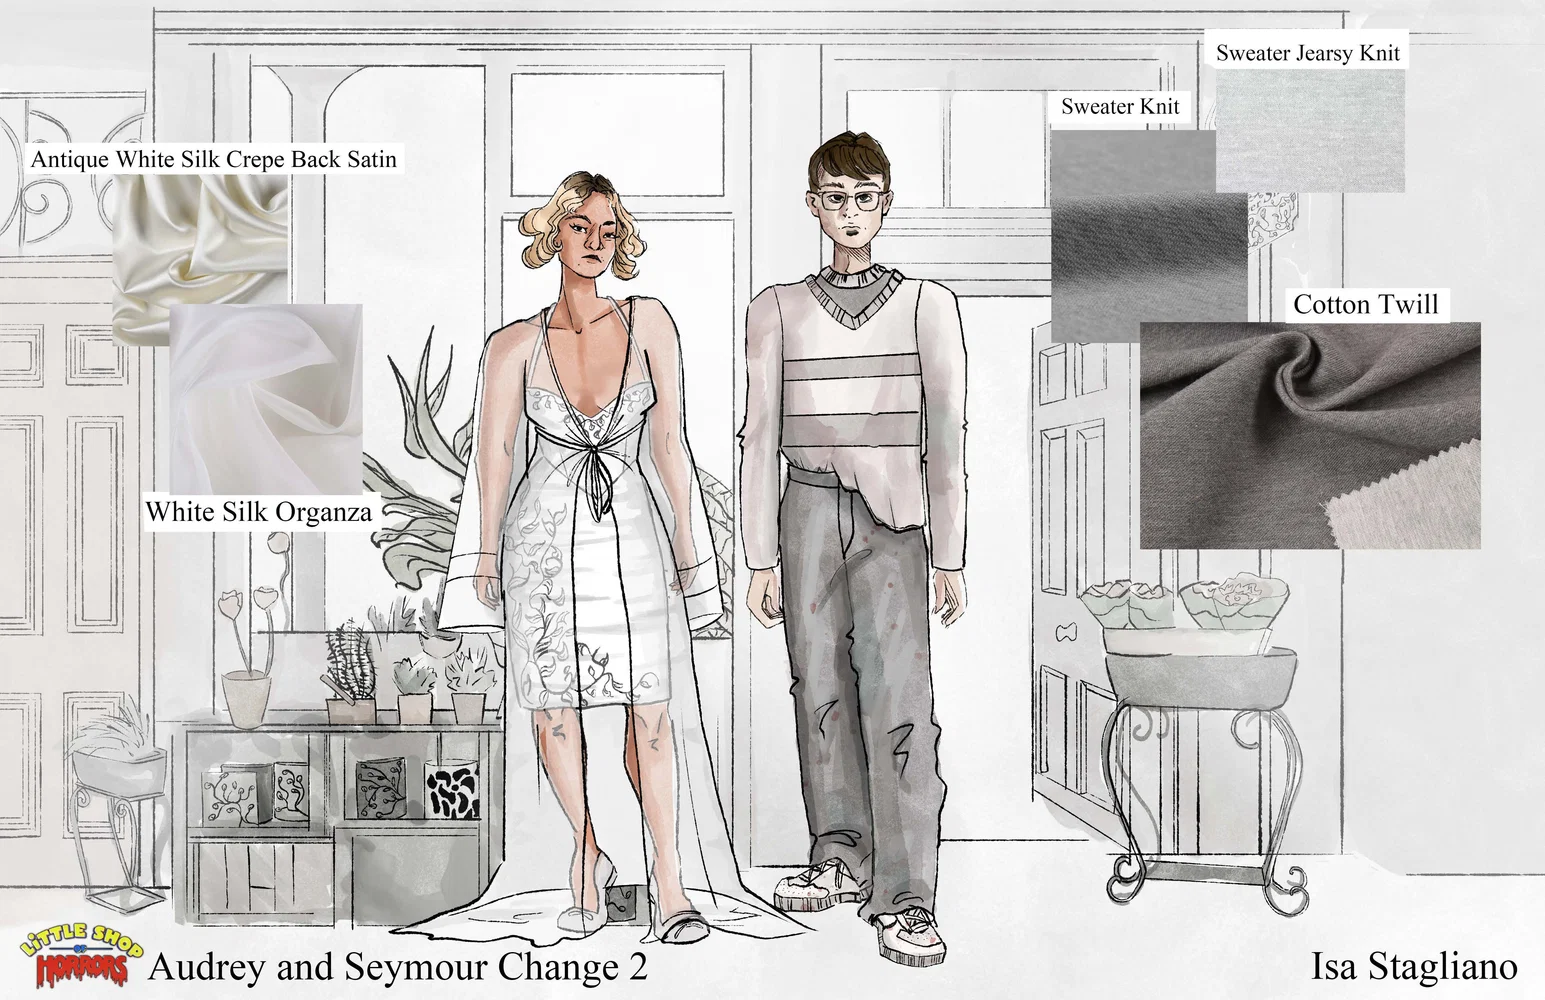 Final illustrations for Audrey and Seymour